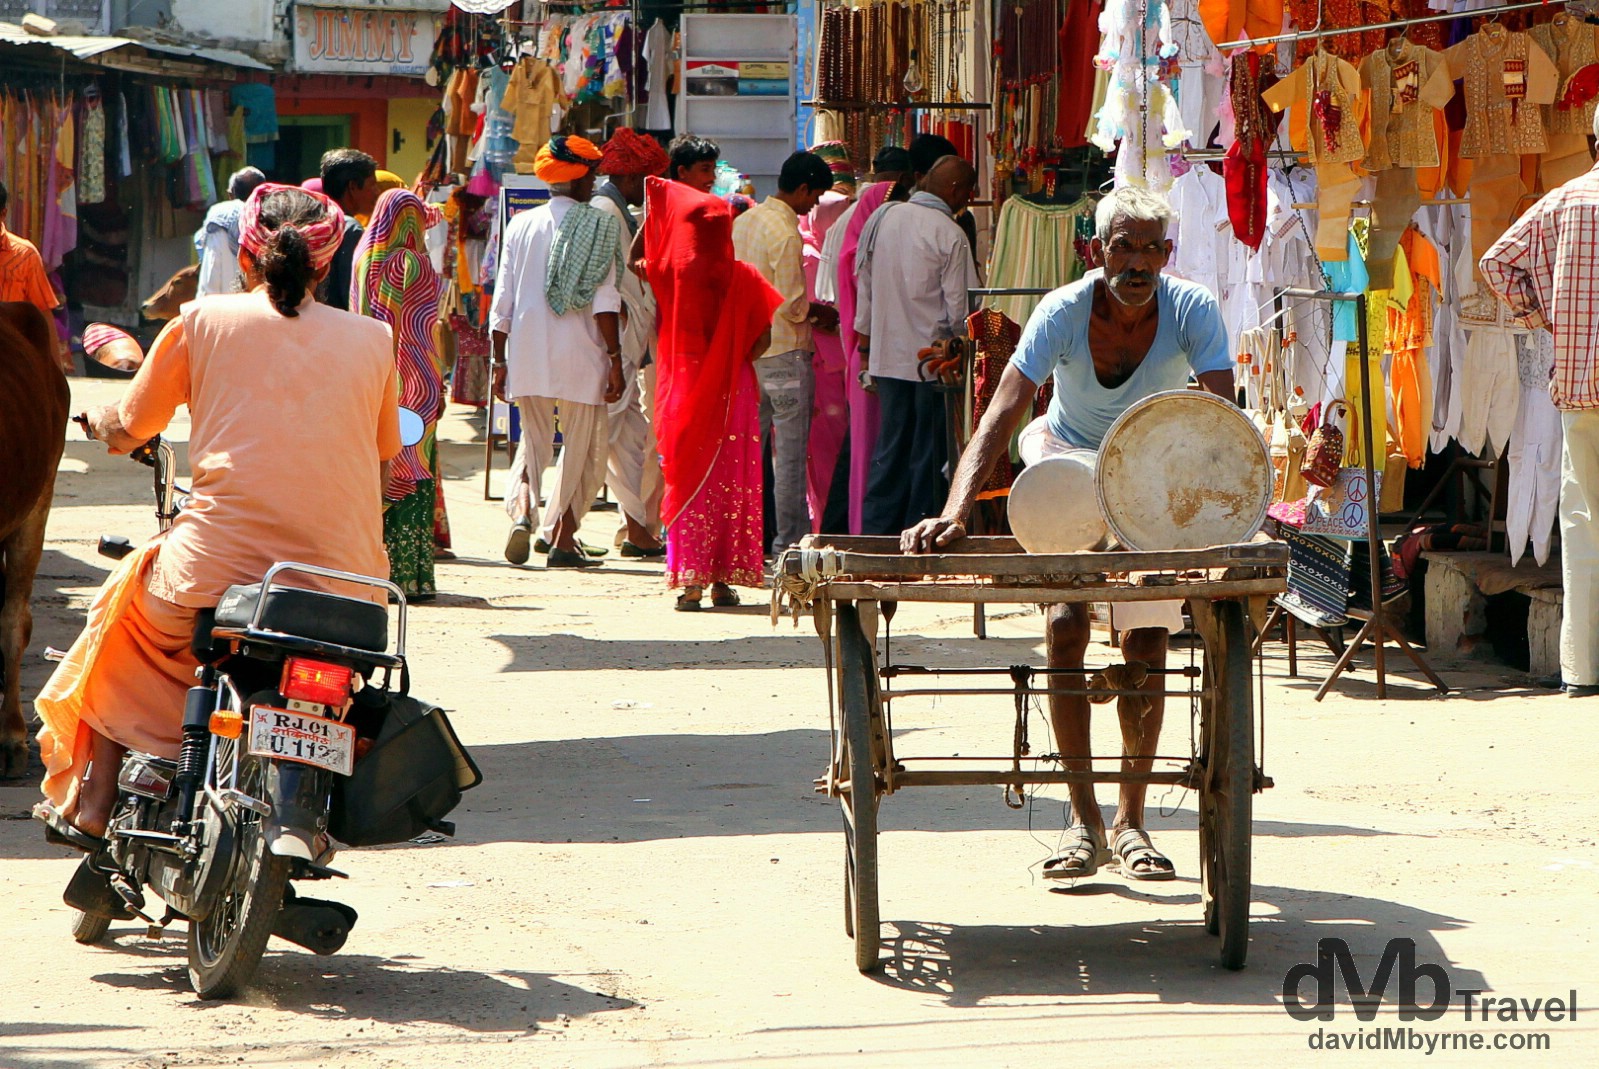 On the streets of Pushkar, Rajasthan, India. October 3rd 2012.